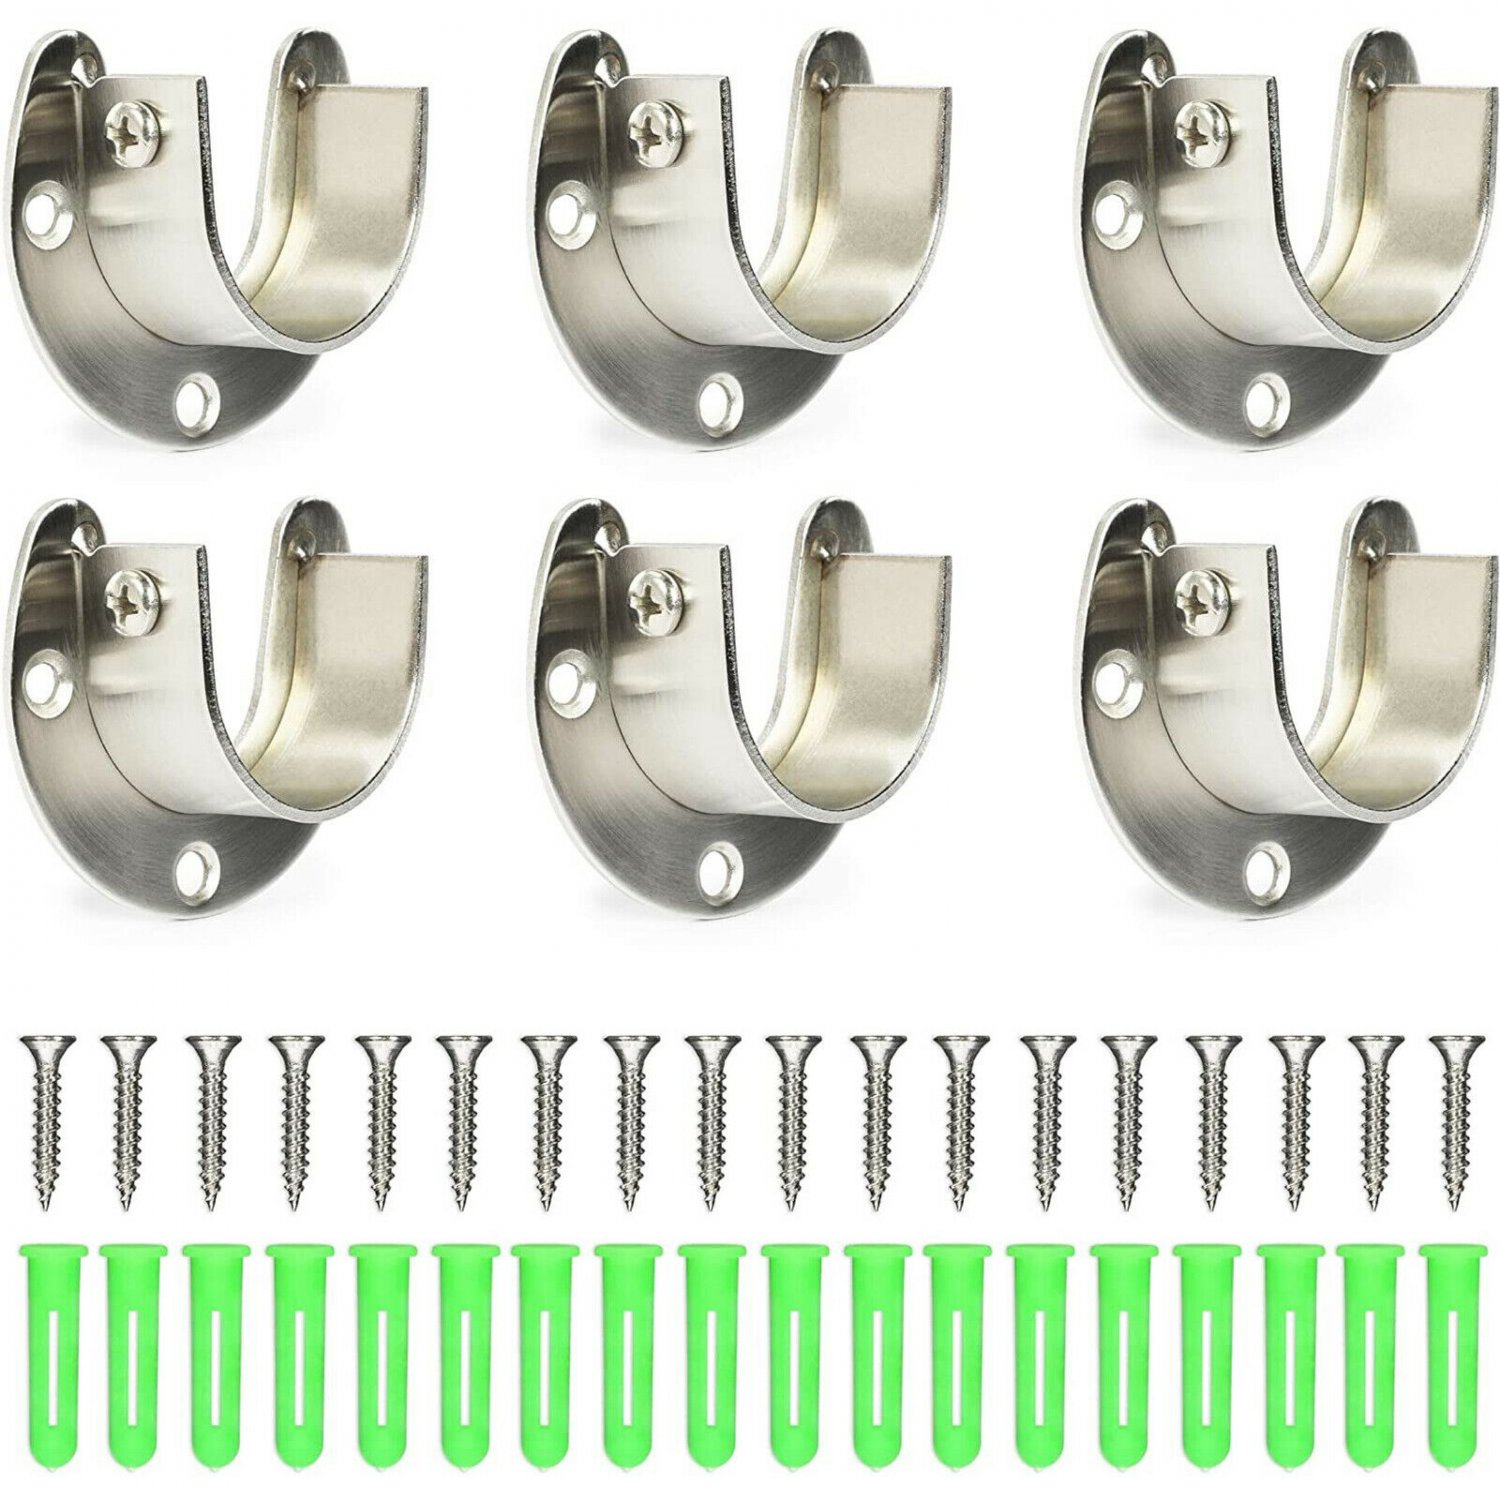 Closet Rod Holders with Screws, Stainless Steel (6 Pack)